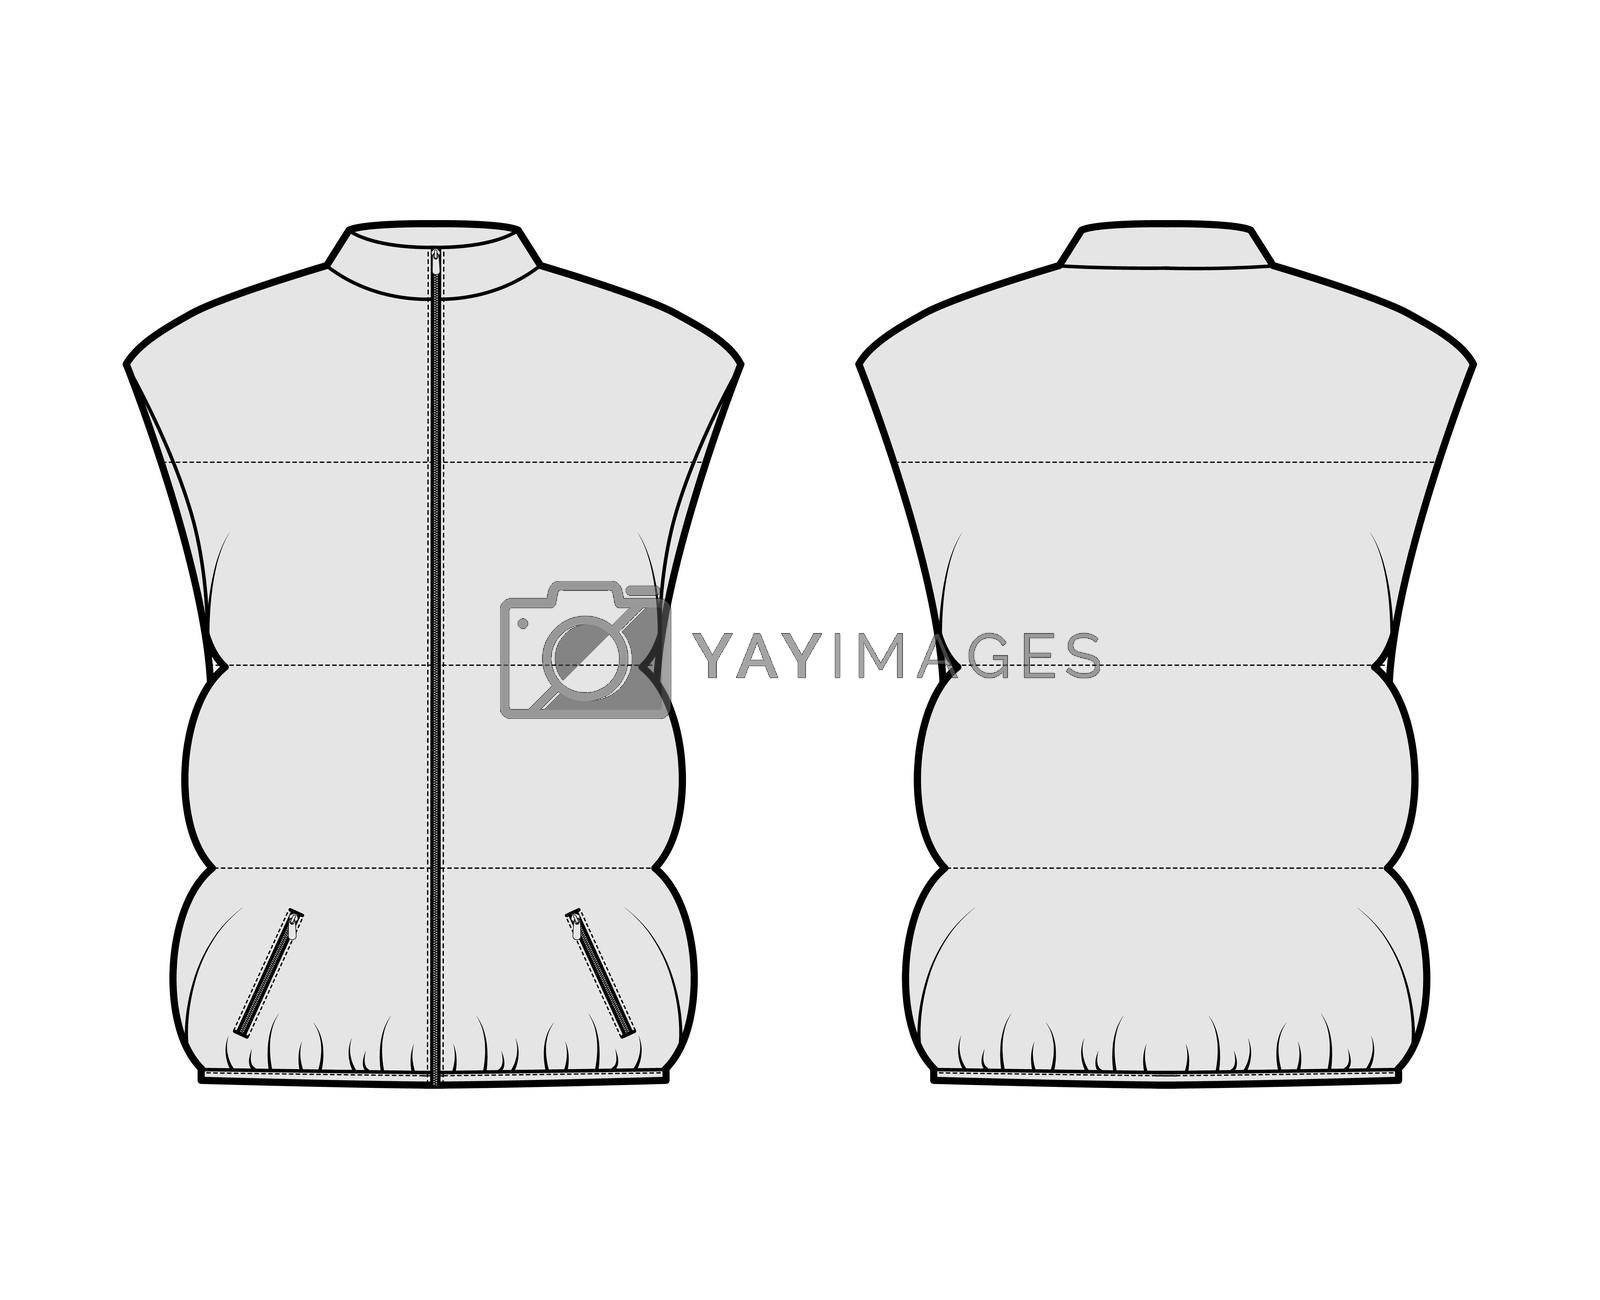 Royalty free image of Down vest puffer waistcoat technical fashion illustration with sleeveless, stand collar, pockets, oversized, hip length by Vectoressa